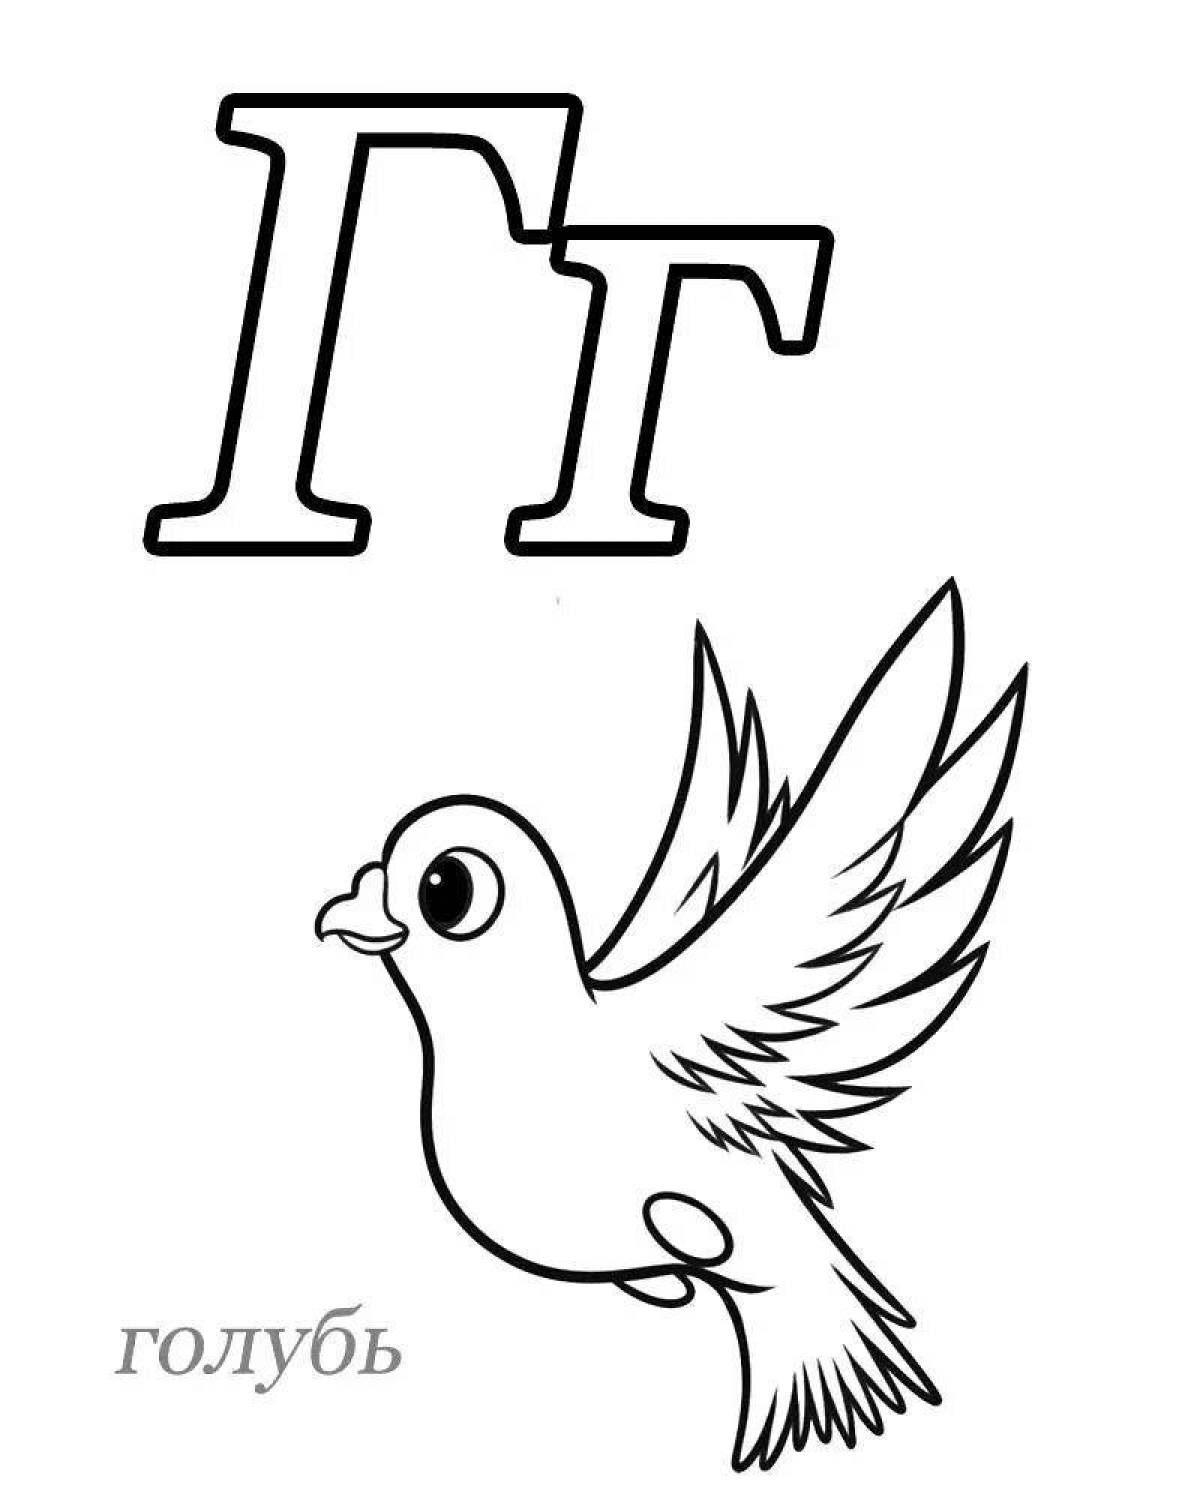 Amazing coloring pages with the letter g for kids